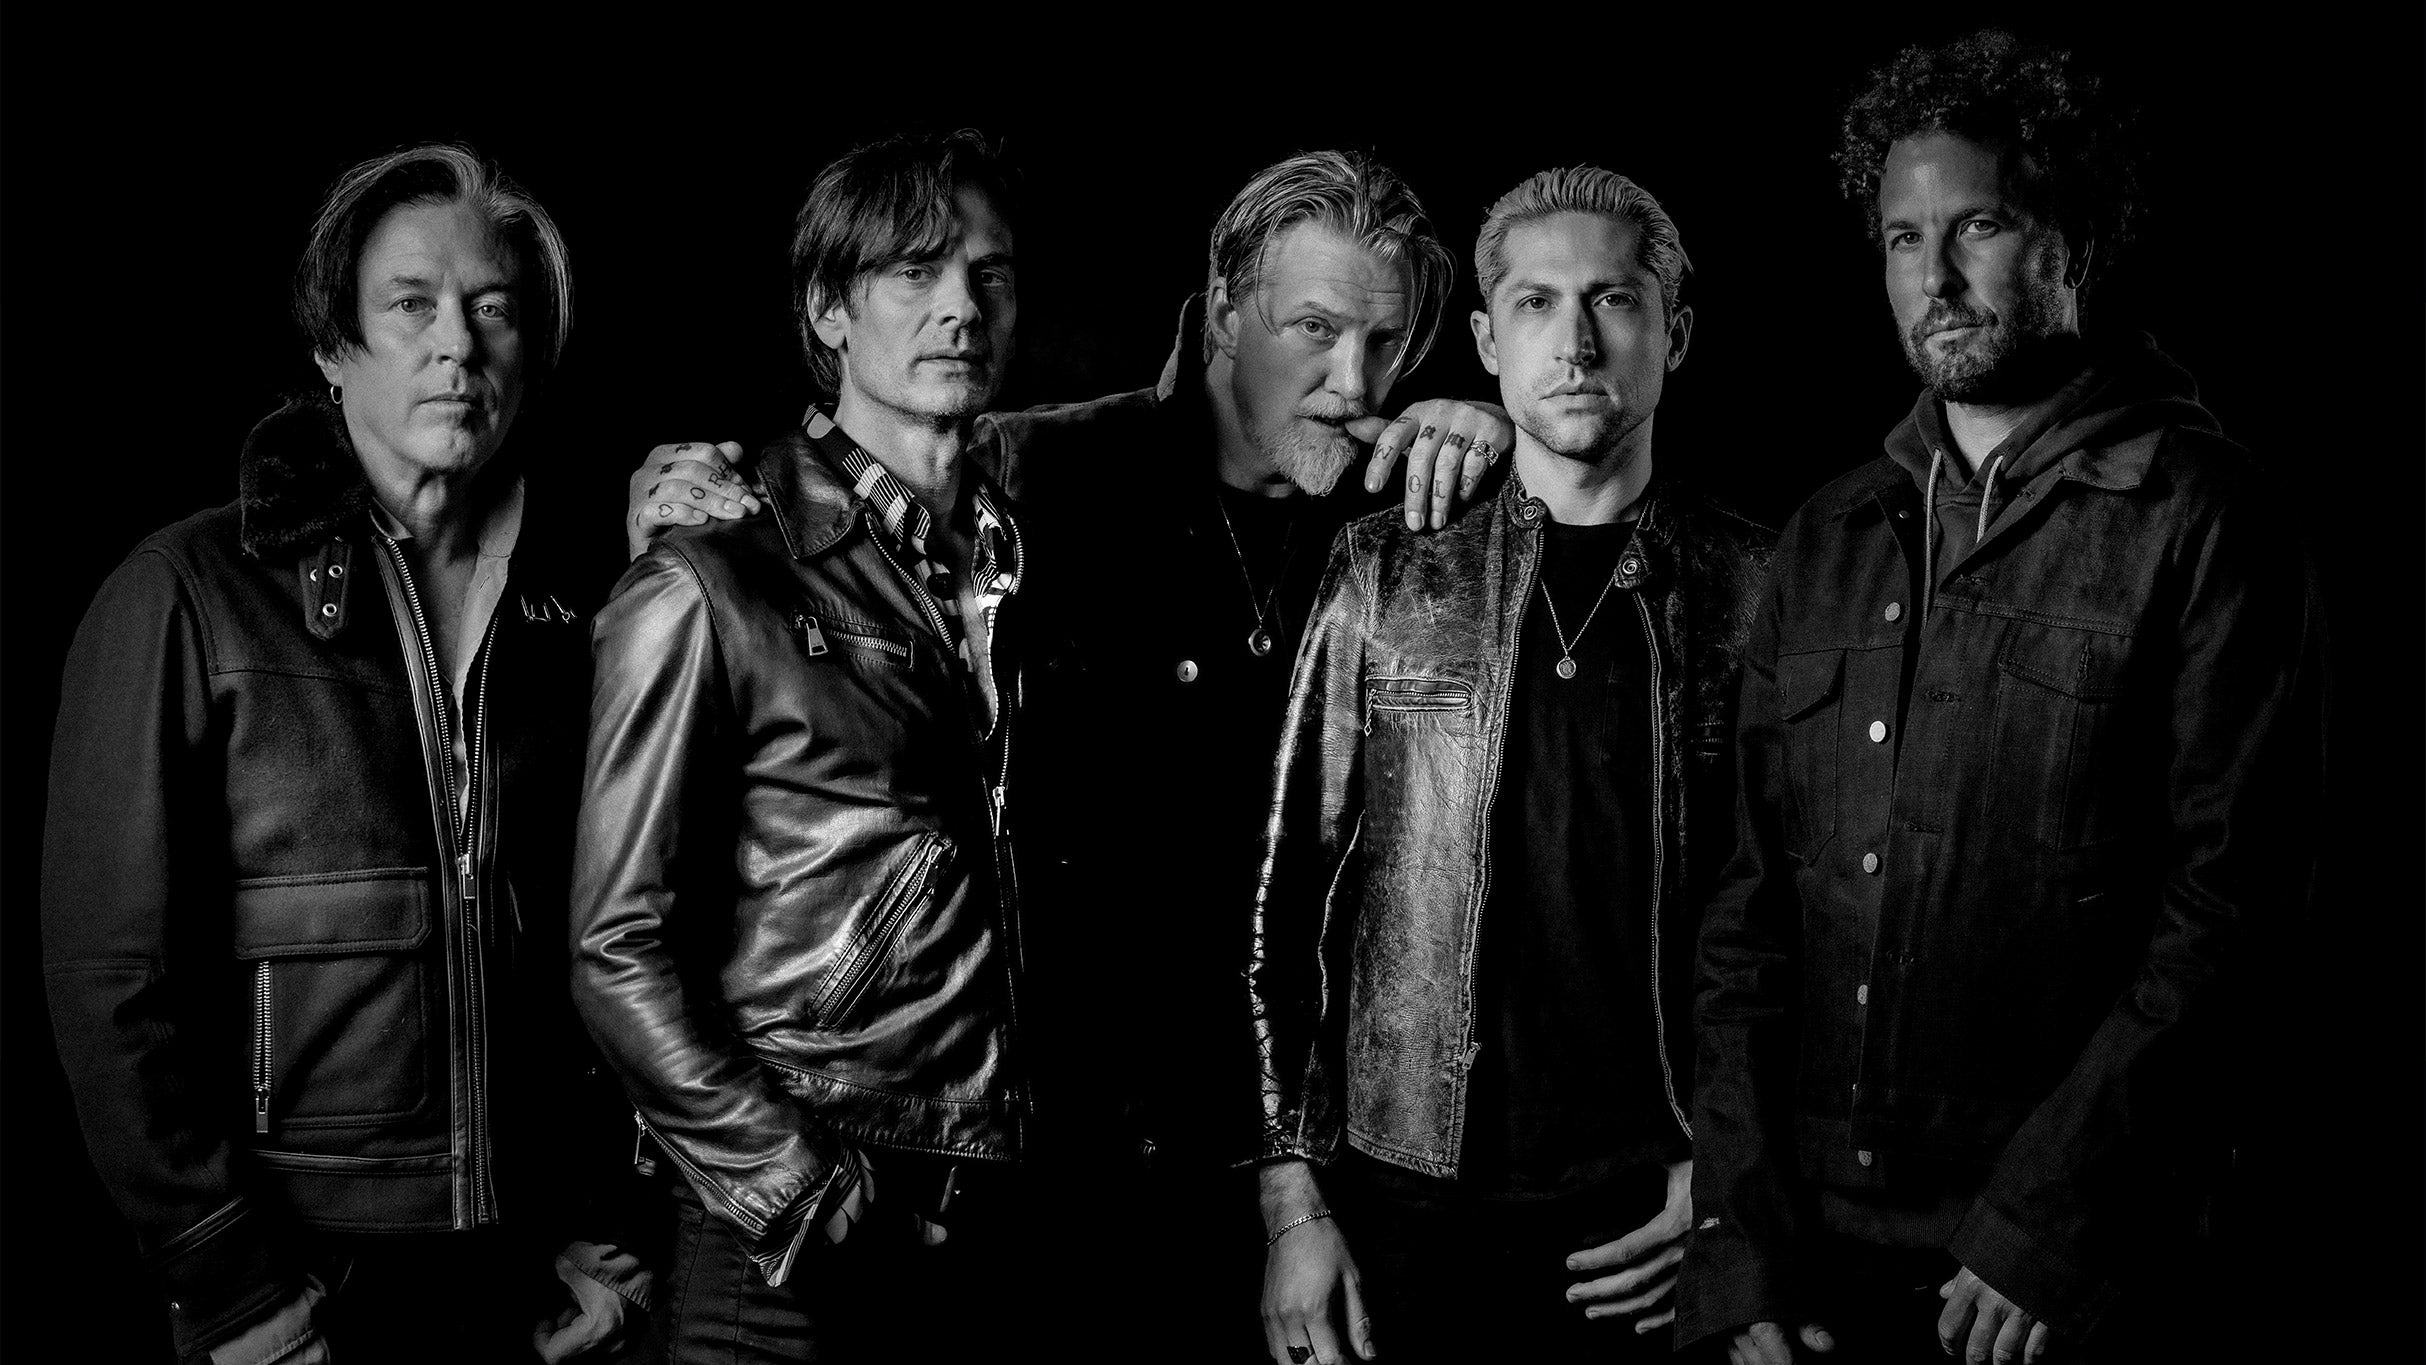 exclusive presale code for Queens of the Stone Age: The End of Nero presale tickets in Auckland